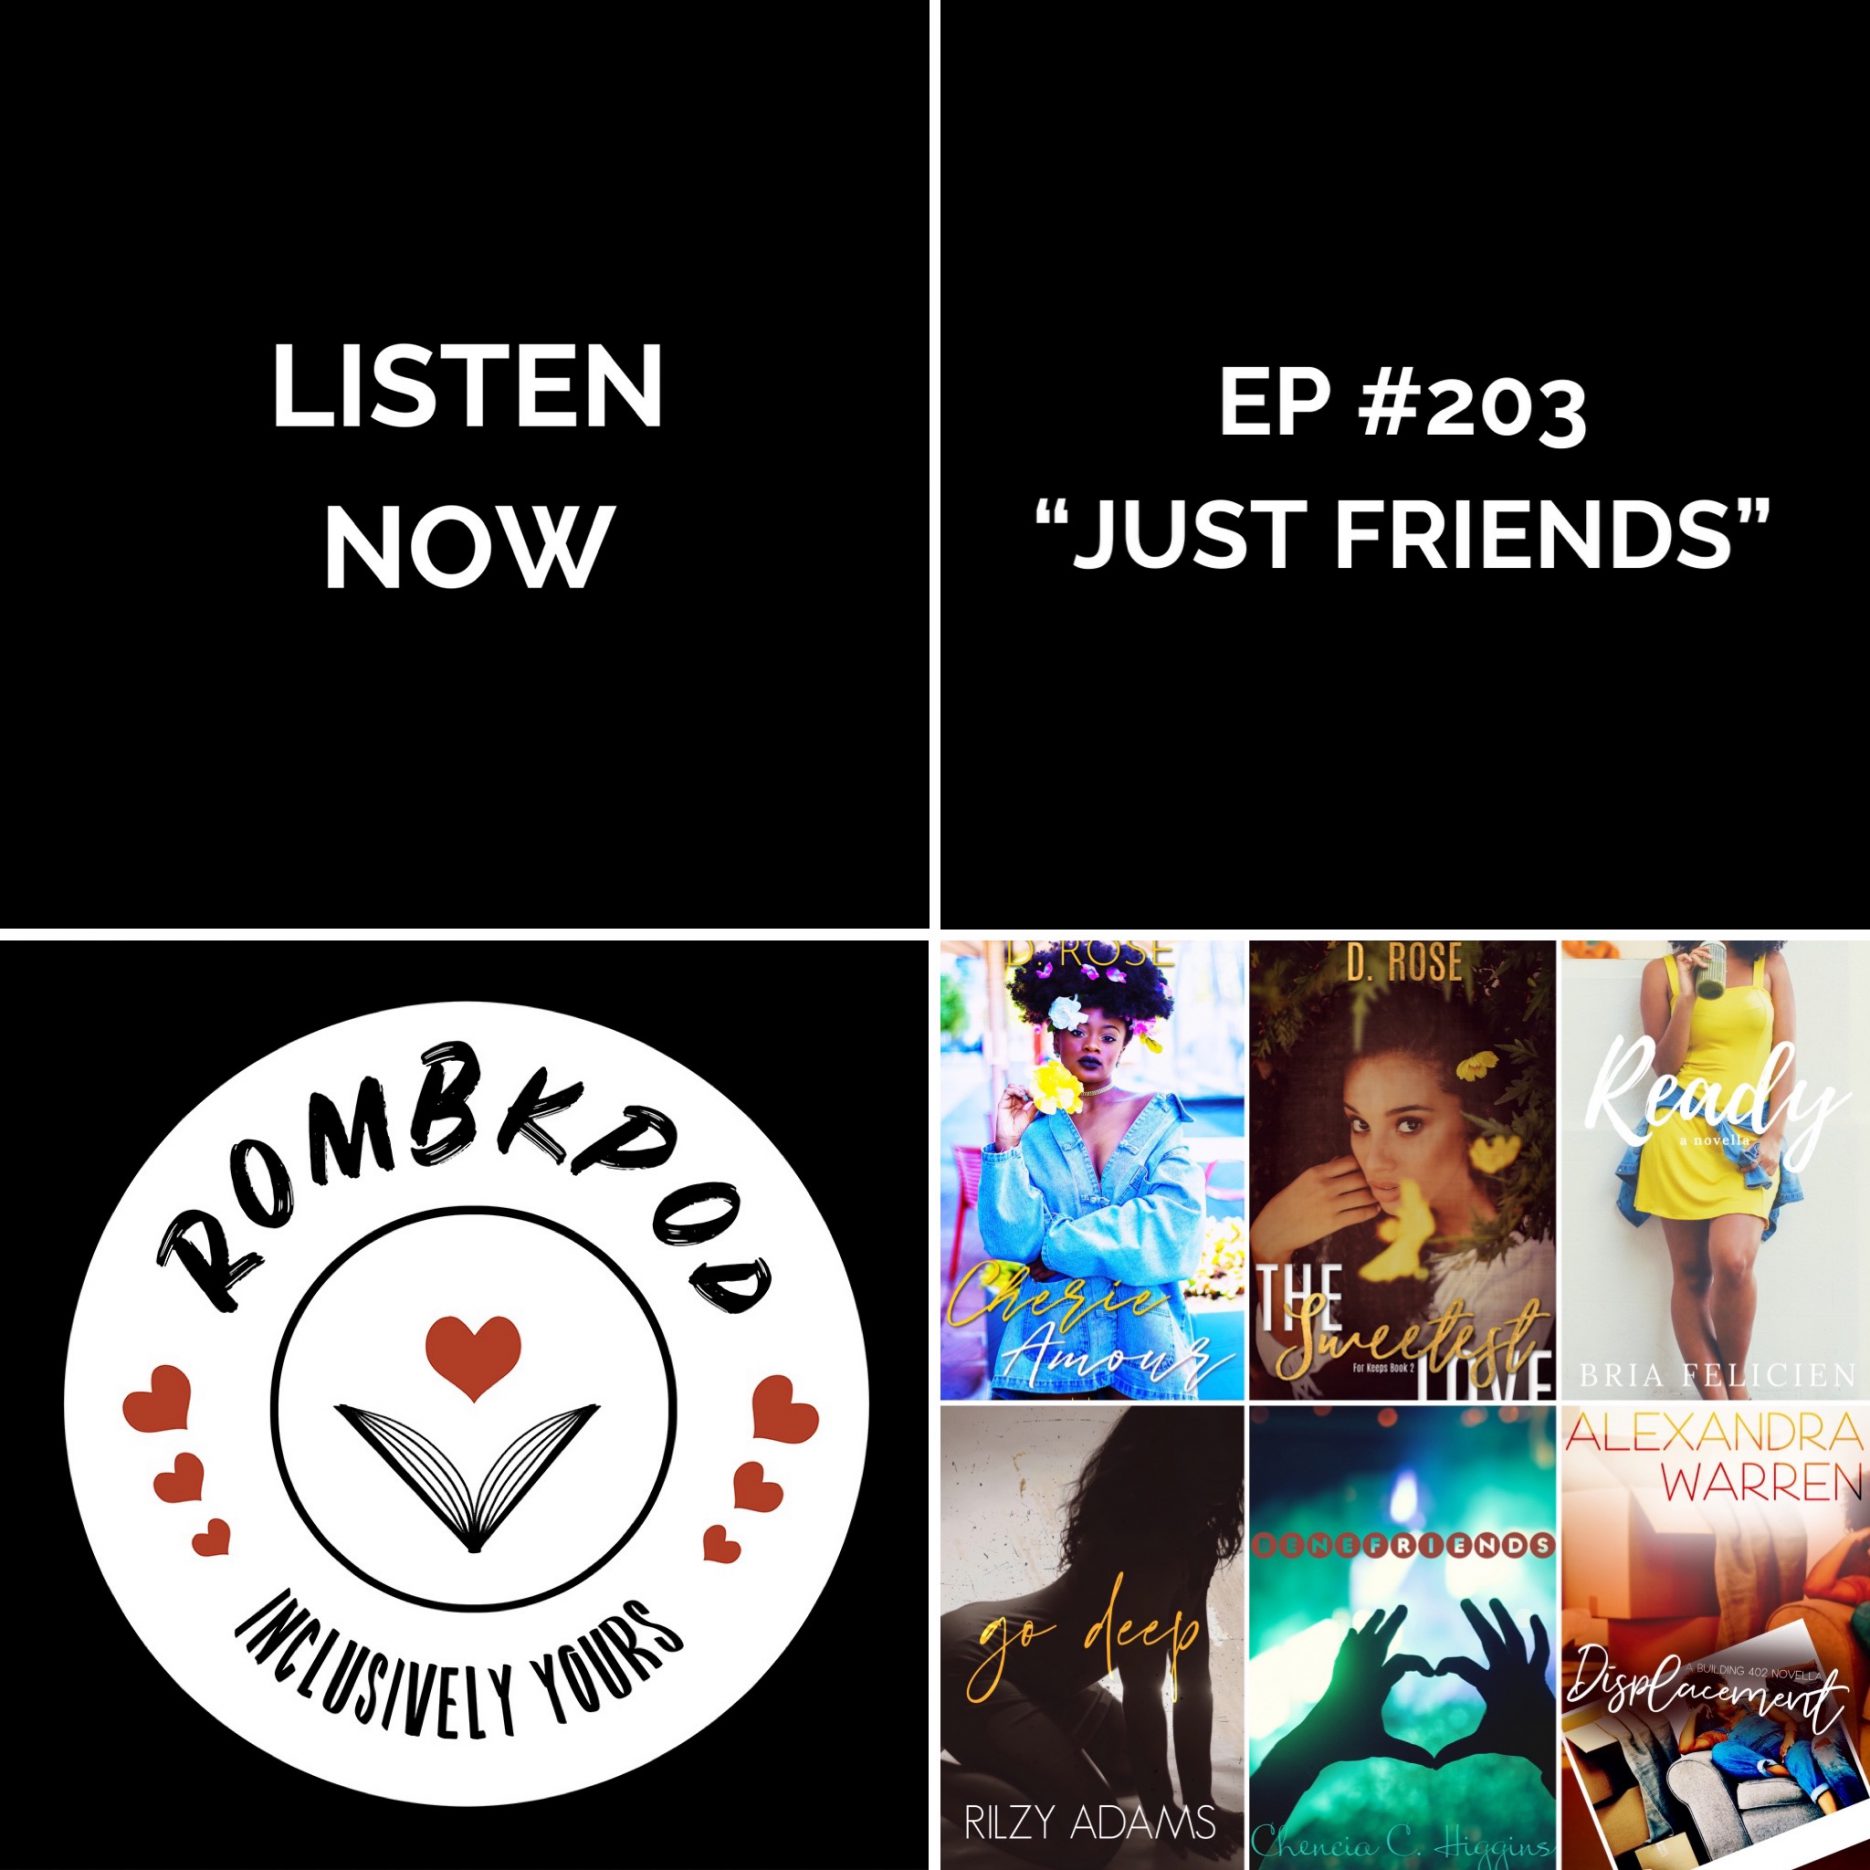 IMAGE: lower left corner, RomBkPod heart logo; lower right corner, ep #203 cover collage; IMAGE TEXT: Listen Now, ep #203 "Just Friends"